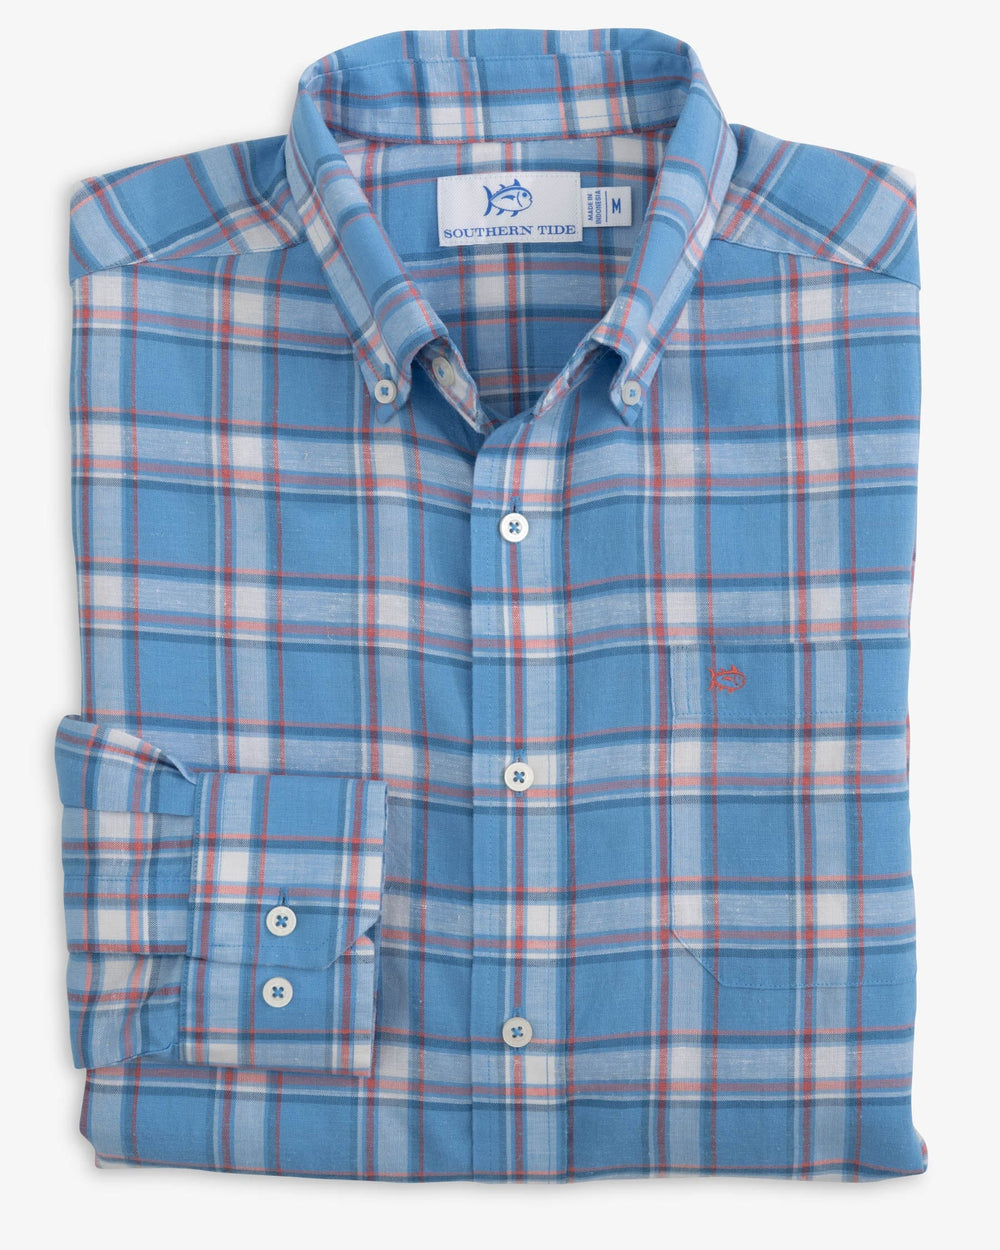 The folded view of the Headland Bayfront Plaid Long Sleeve Buttom Down Sport Shirt by Southern Tide - Boat Blue